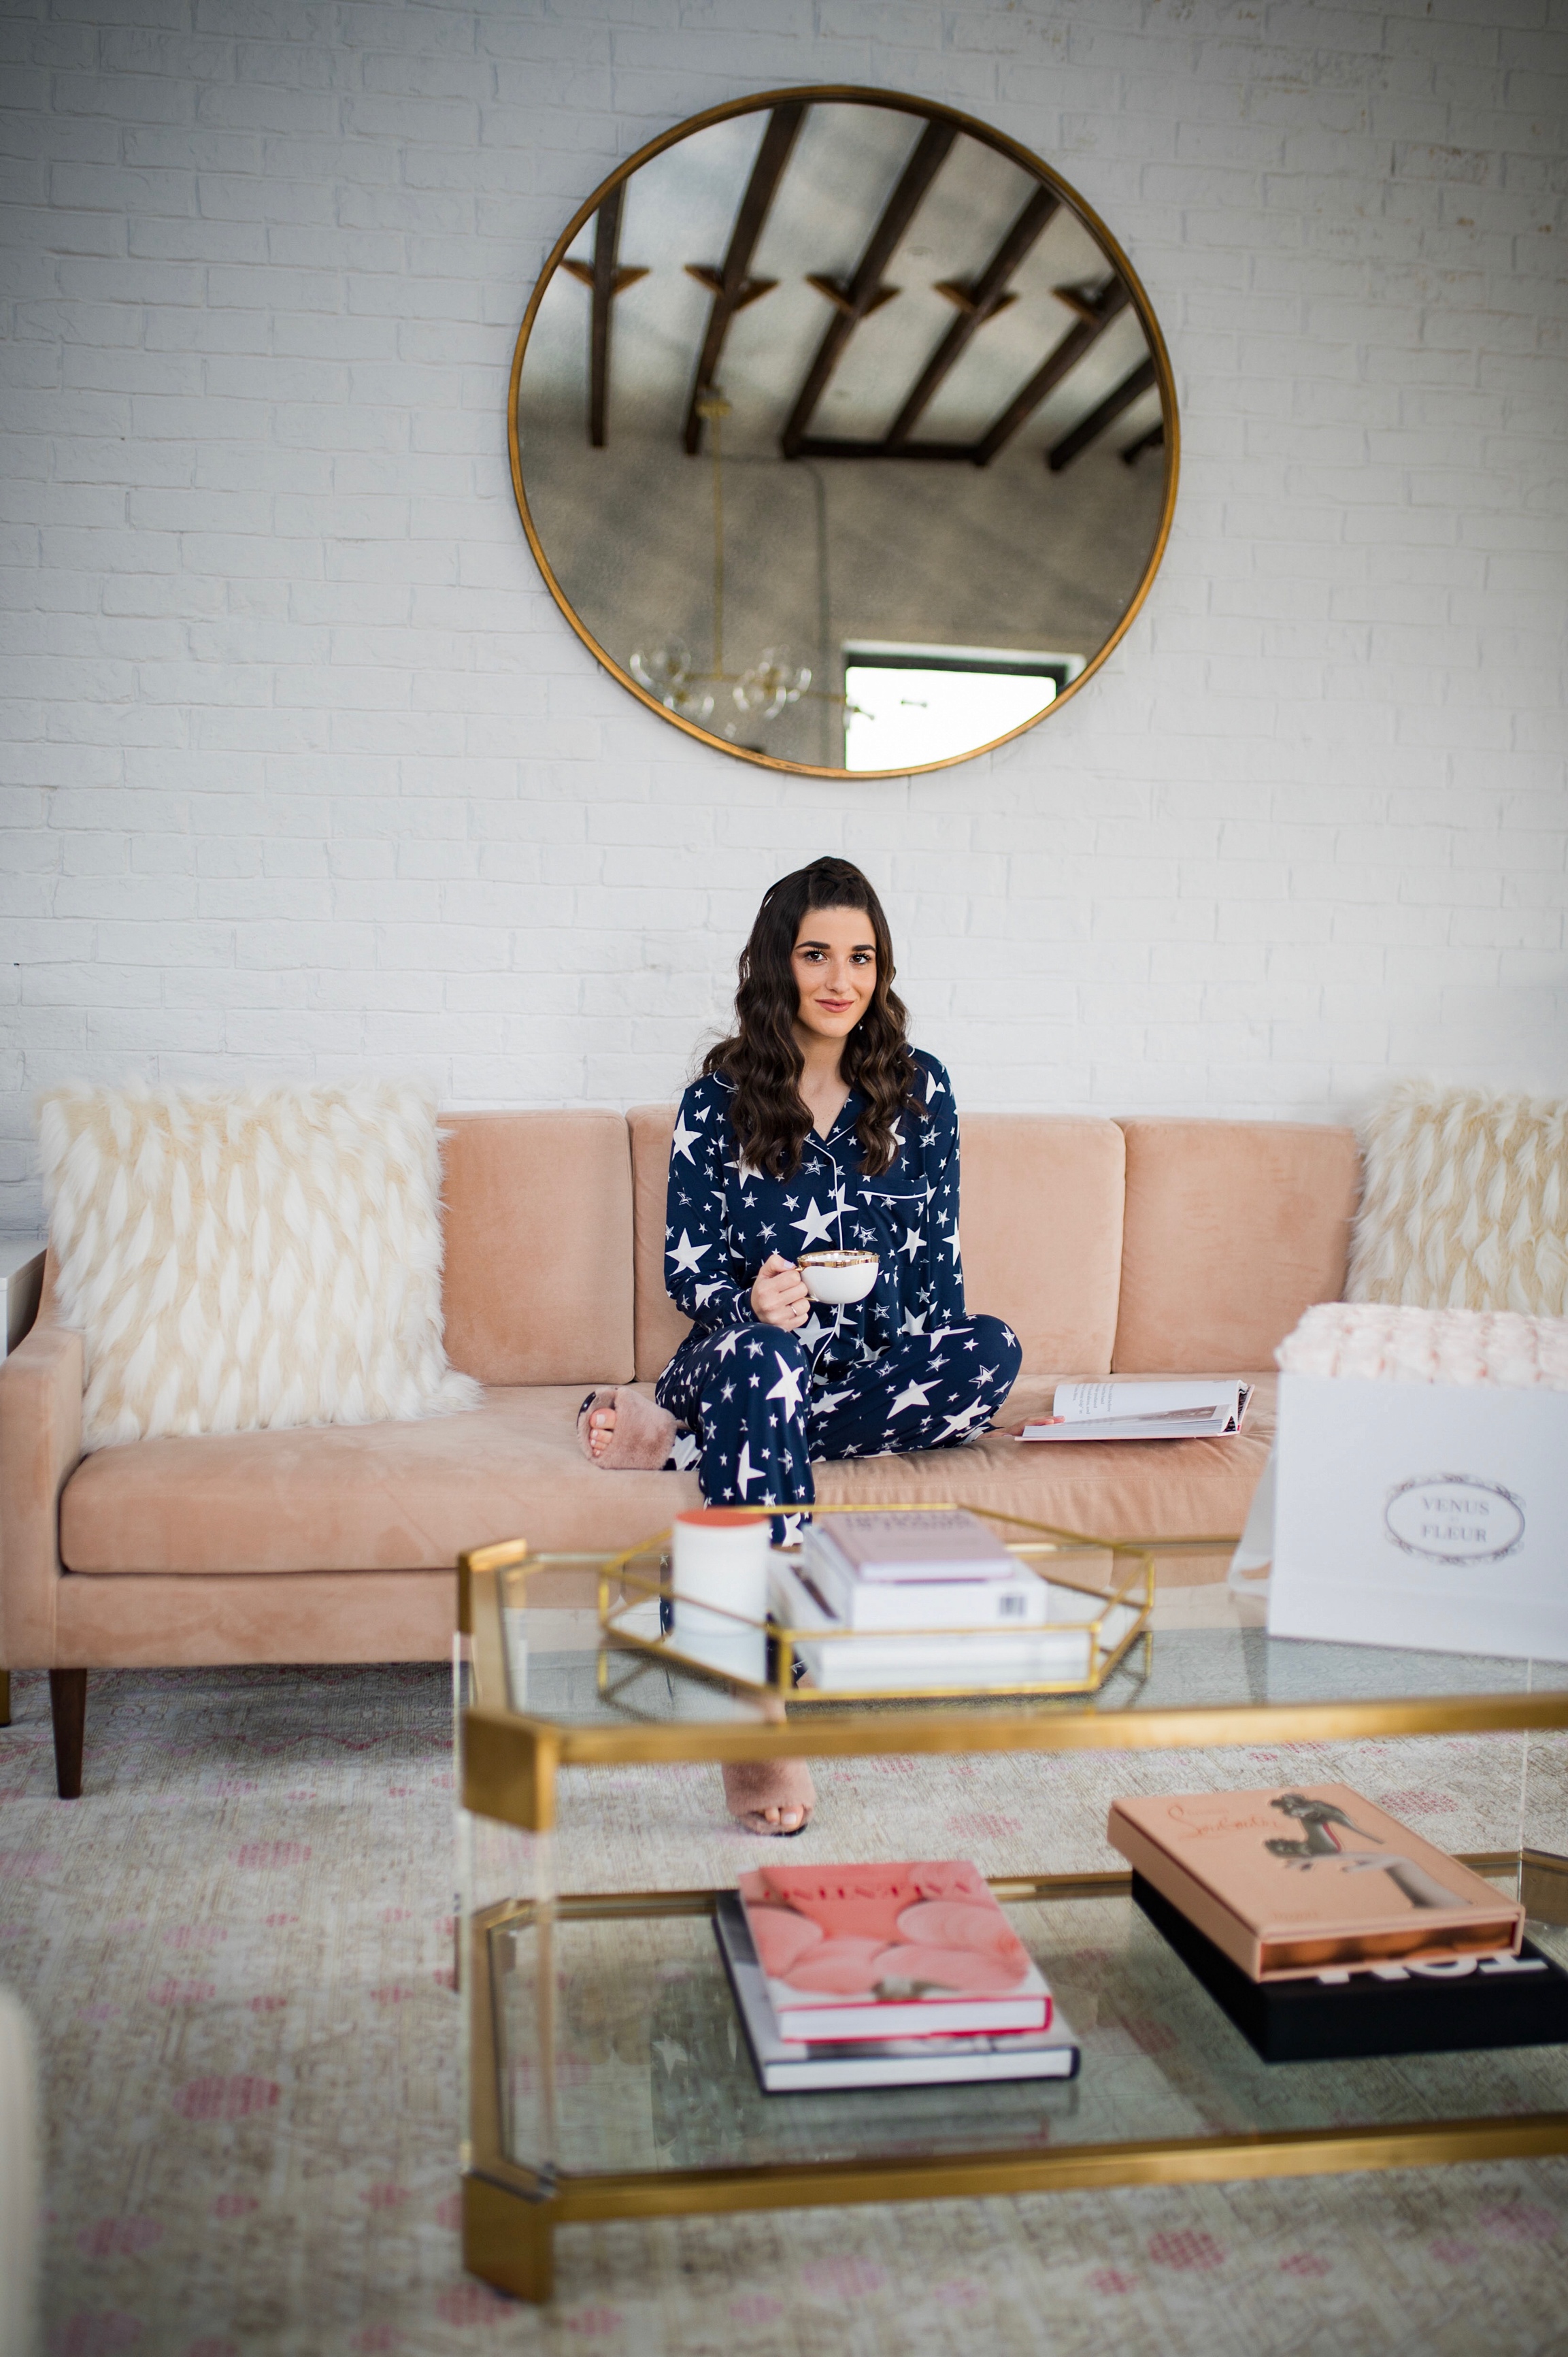 5 Tips For Becoming A Morning Person Navy Star Pajamas Esther Santer Fashion Blog NYC Street Style Blogger Outfit OOTD Trendy Shopping PJs Holiday ASOS Cute Wear Interior Beautiful Home Penthouse Wayfair Circle Mirror Venus Et Fleur Gold Coffee Table.jpg